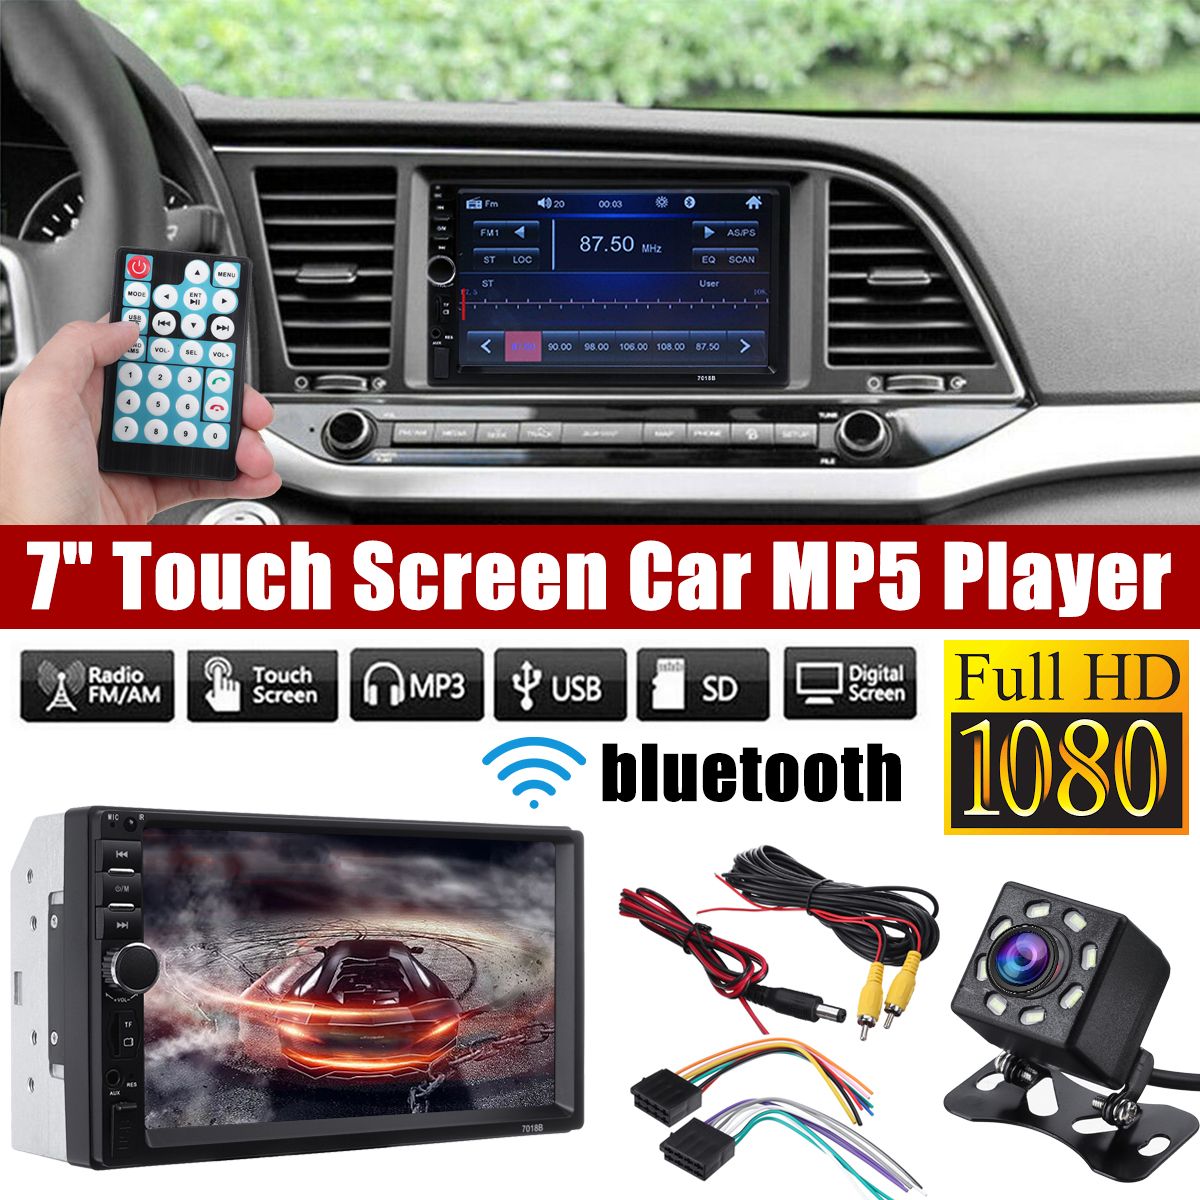 7018B-7-Inch-2DIN-Car-MP5-Player-LCD-Touch-Screen-bluetooth-FM-Radio-Phone-Mirror-Link-With-8LED-Bac-1744092